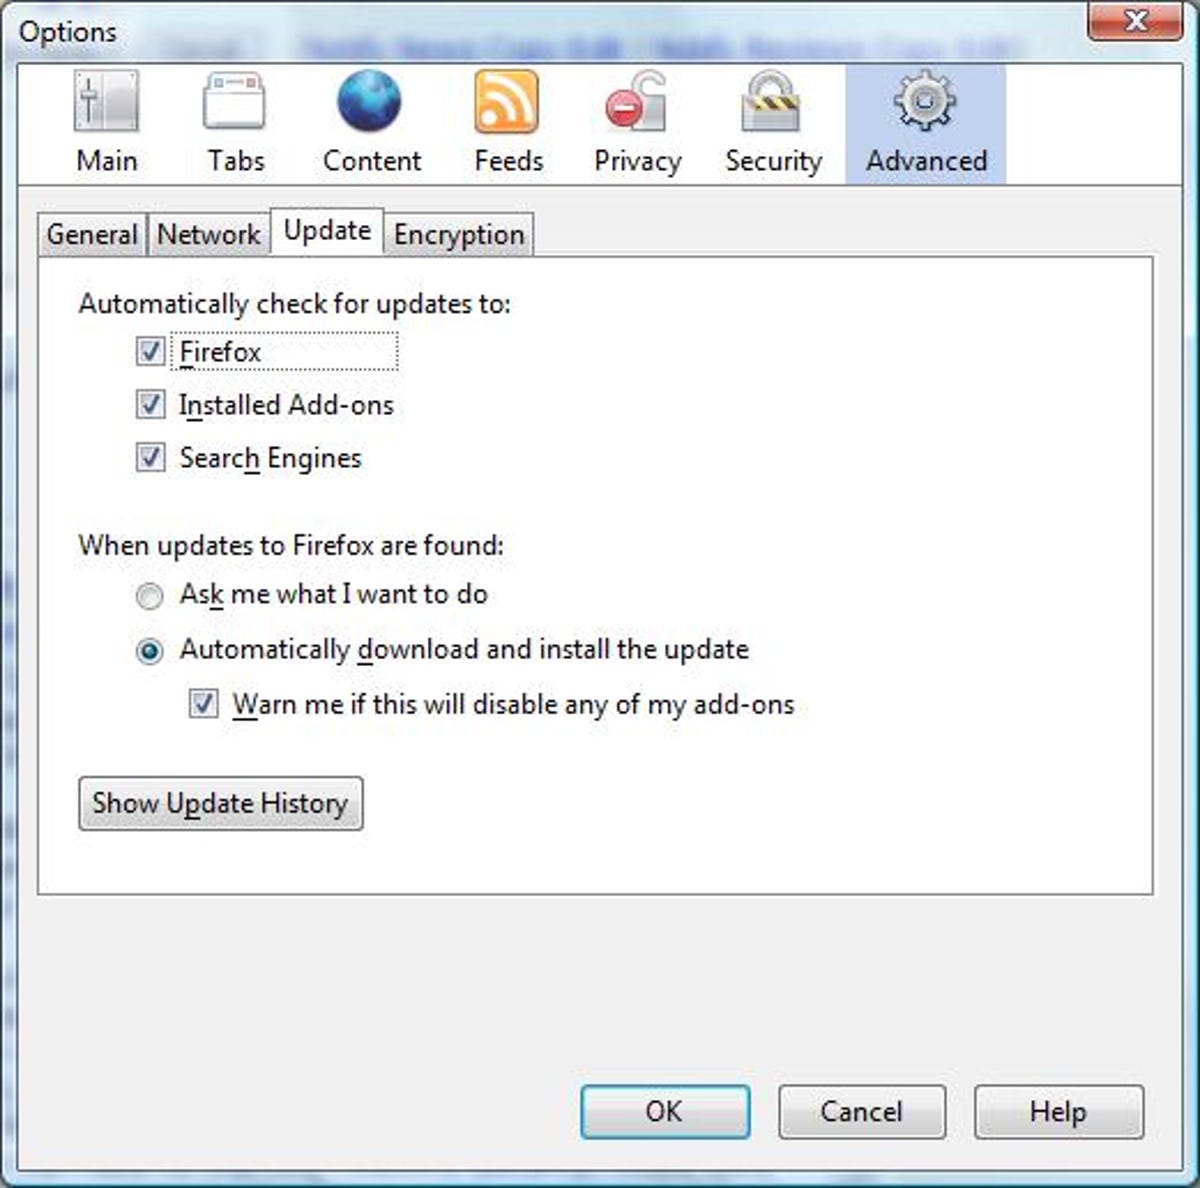 Mozilla Firefox's update settings in the Advanced Options dialog box